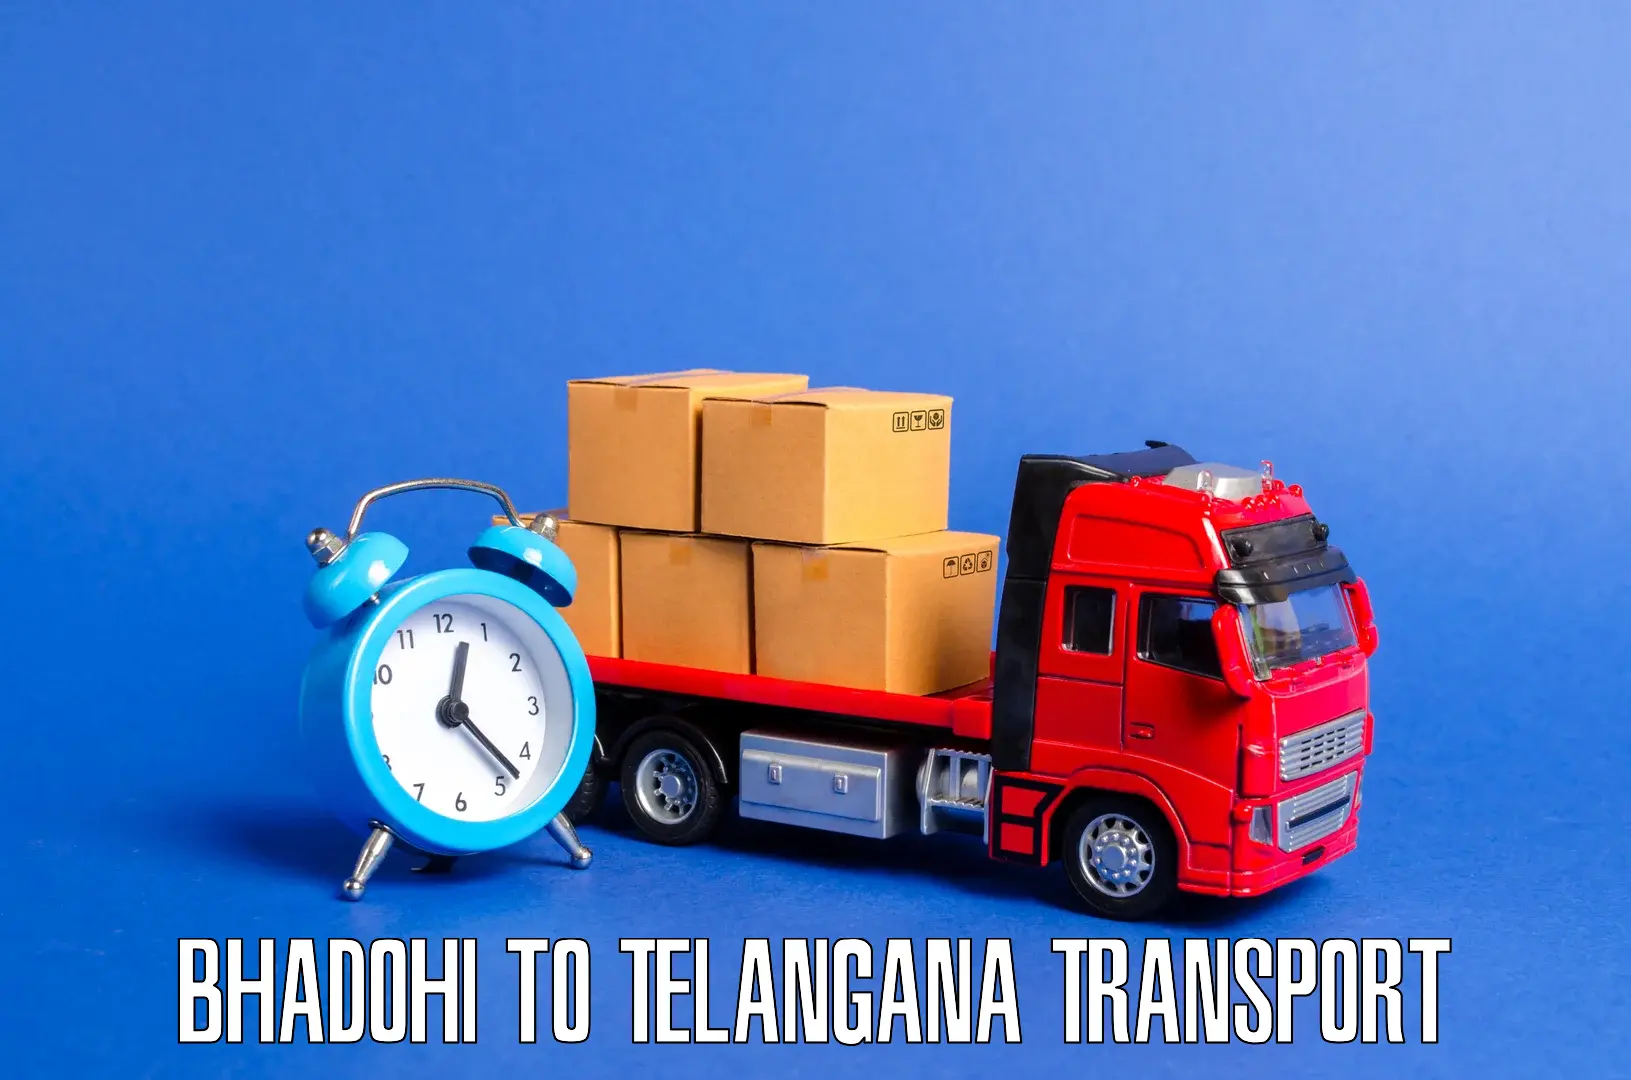 Goods delivery service in Bhadohi to Hyderabad